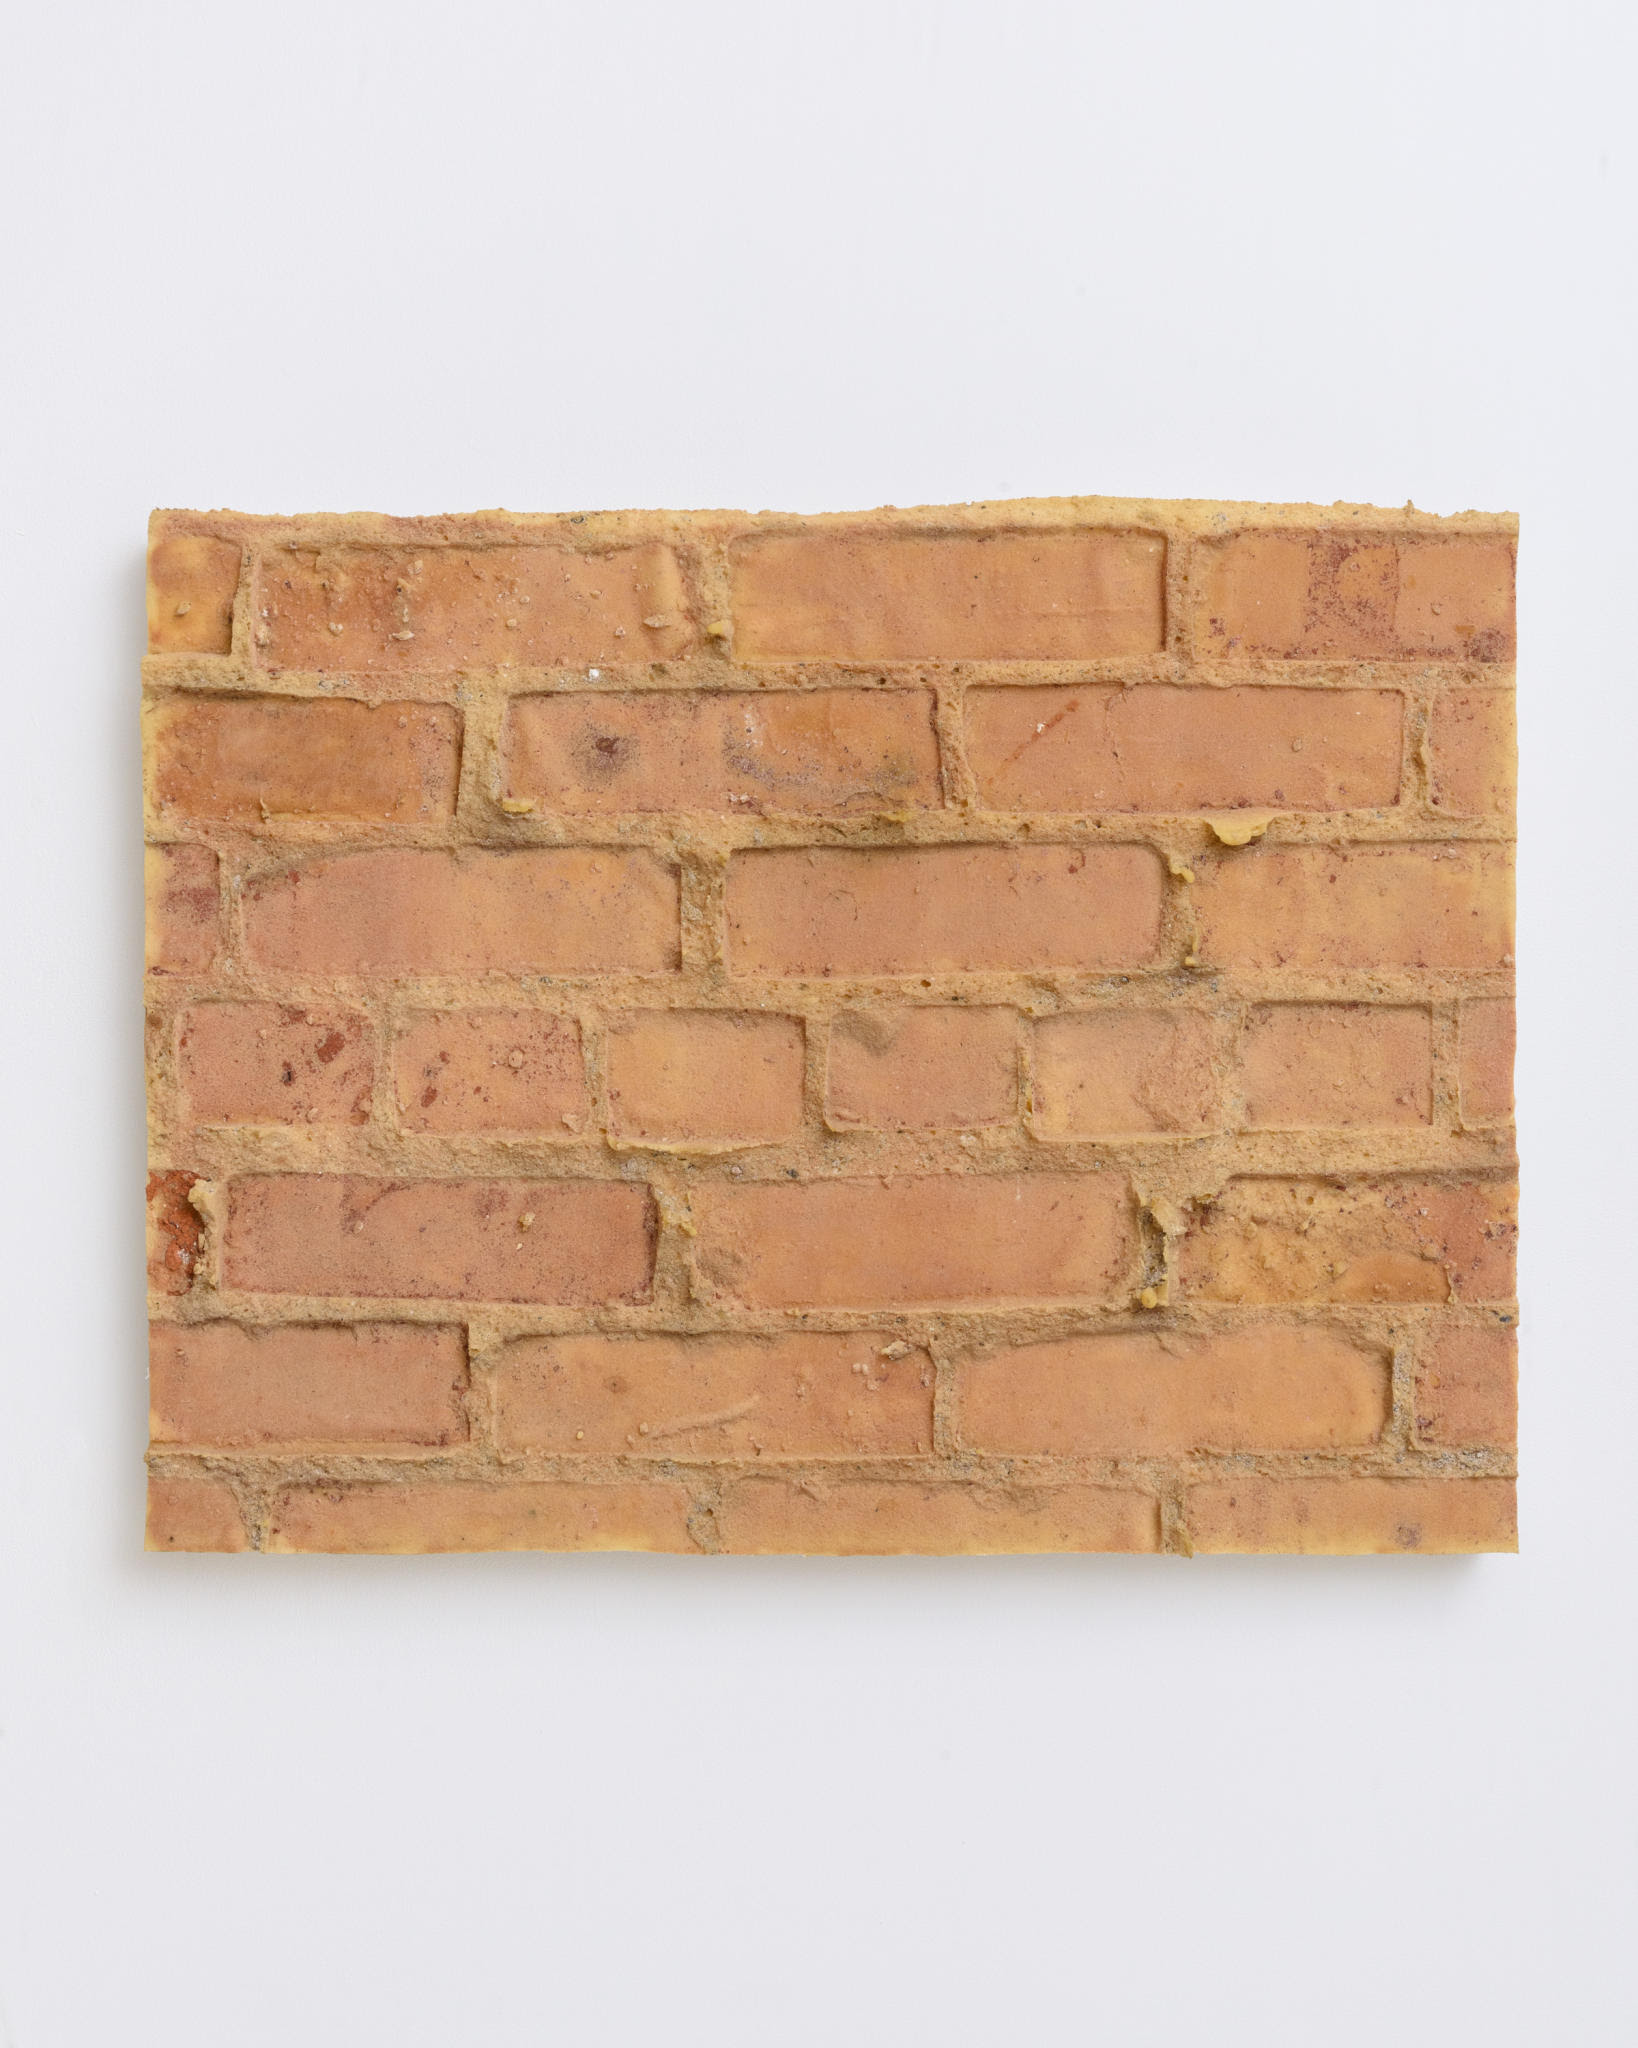 A brick wall with a hole in it

Description automatically generated with low confidence